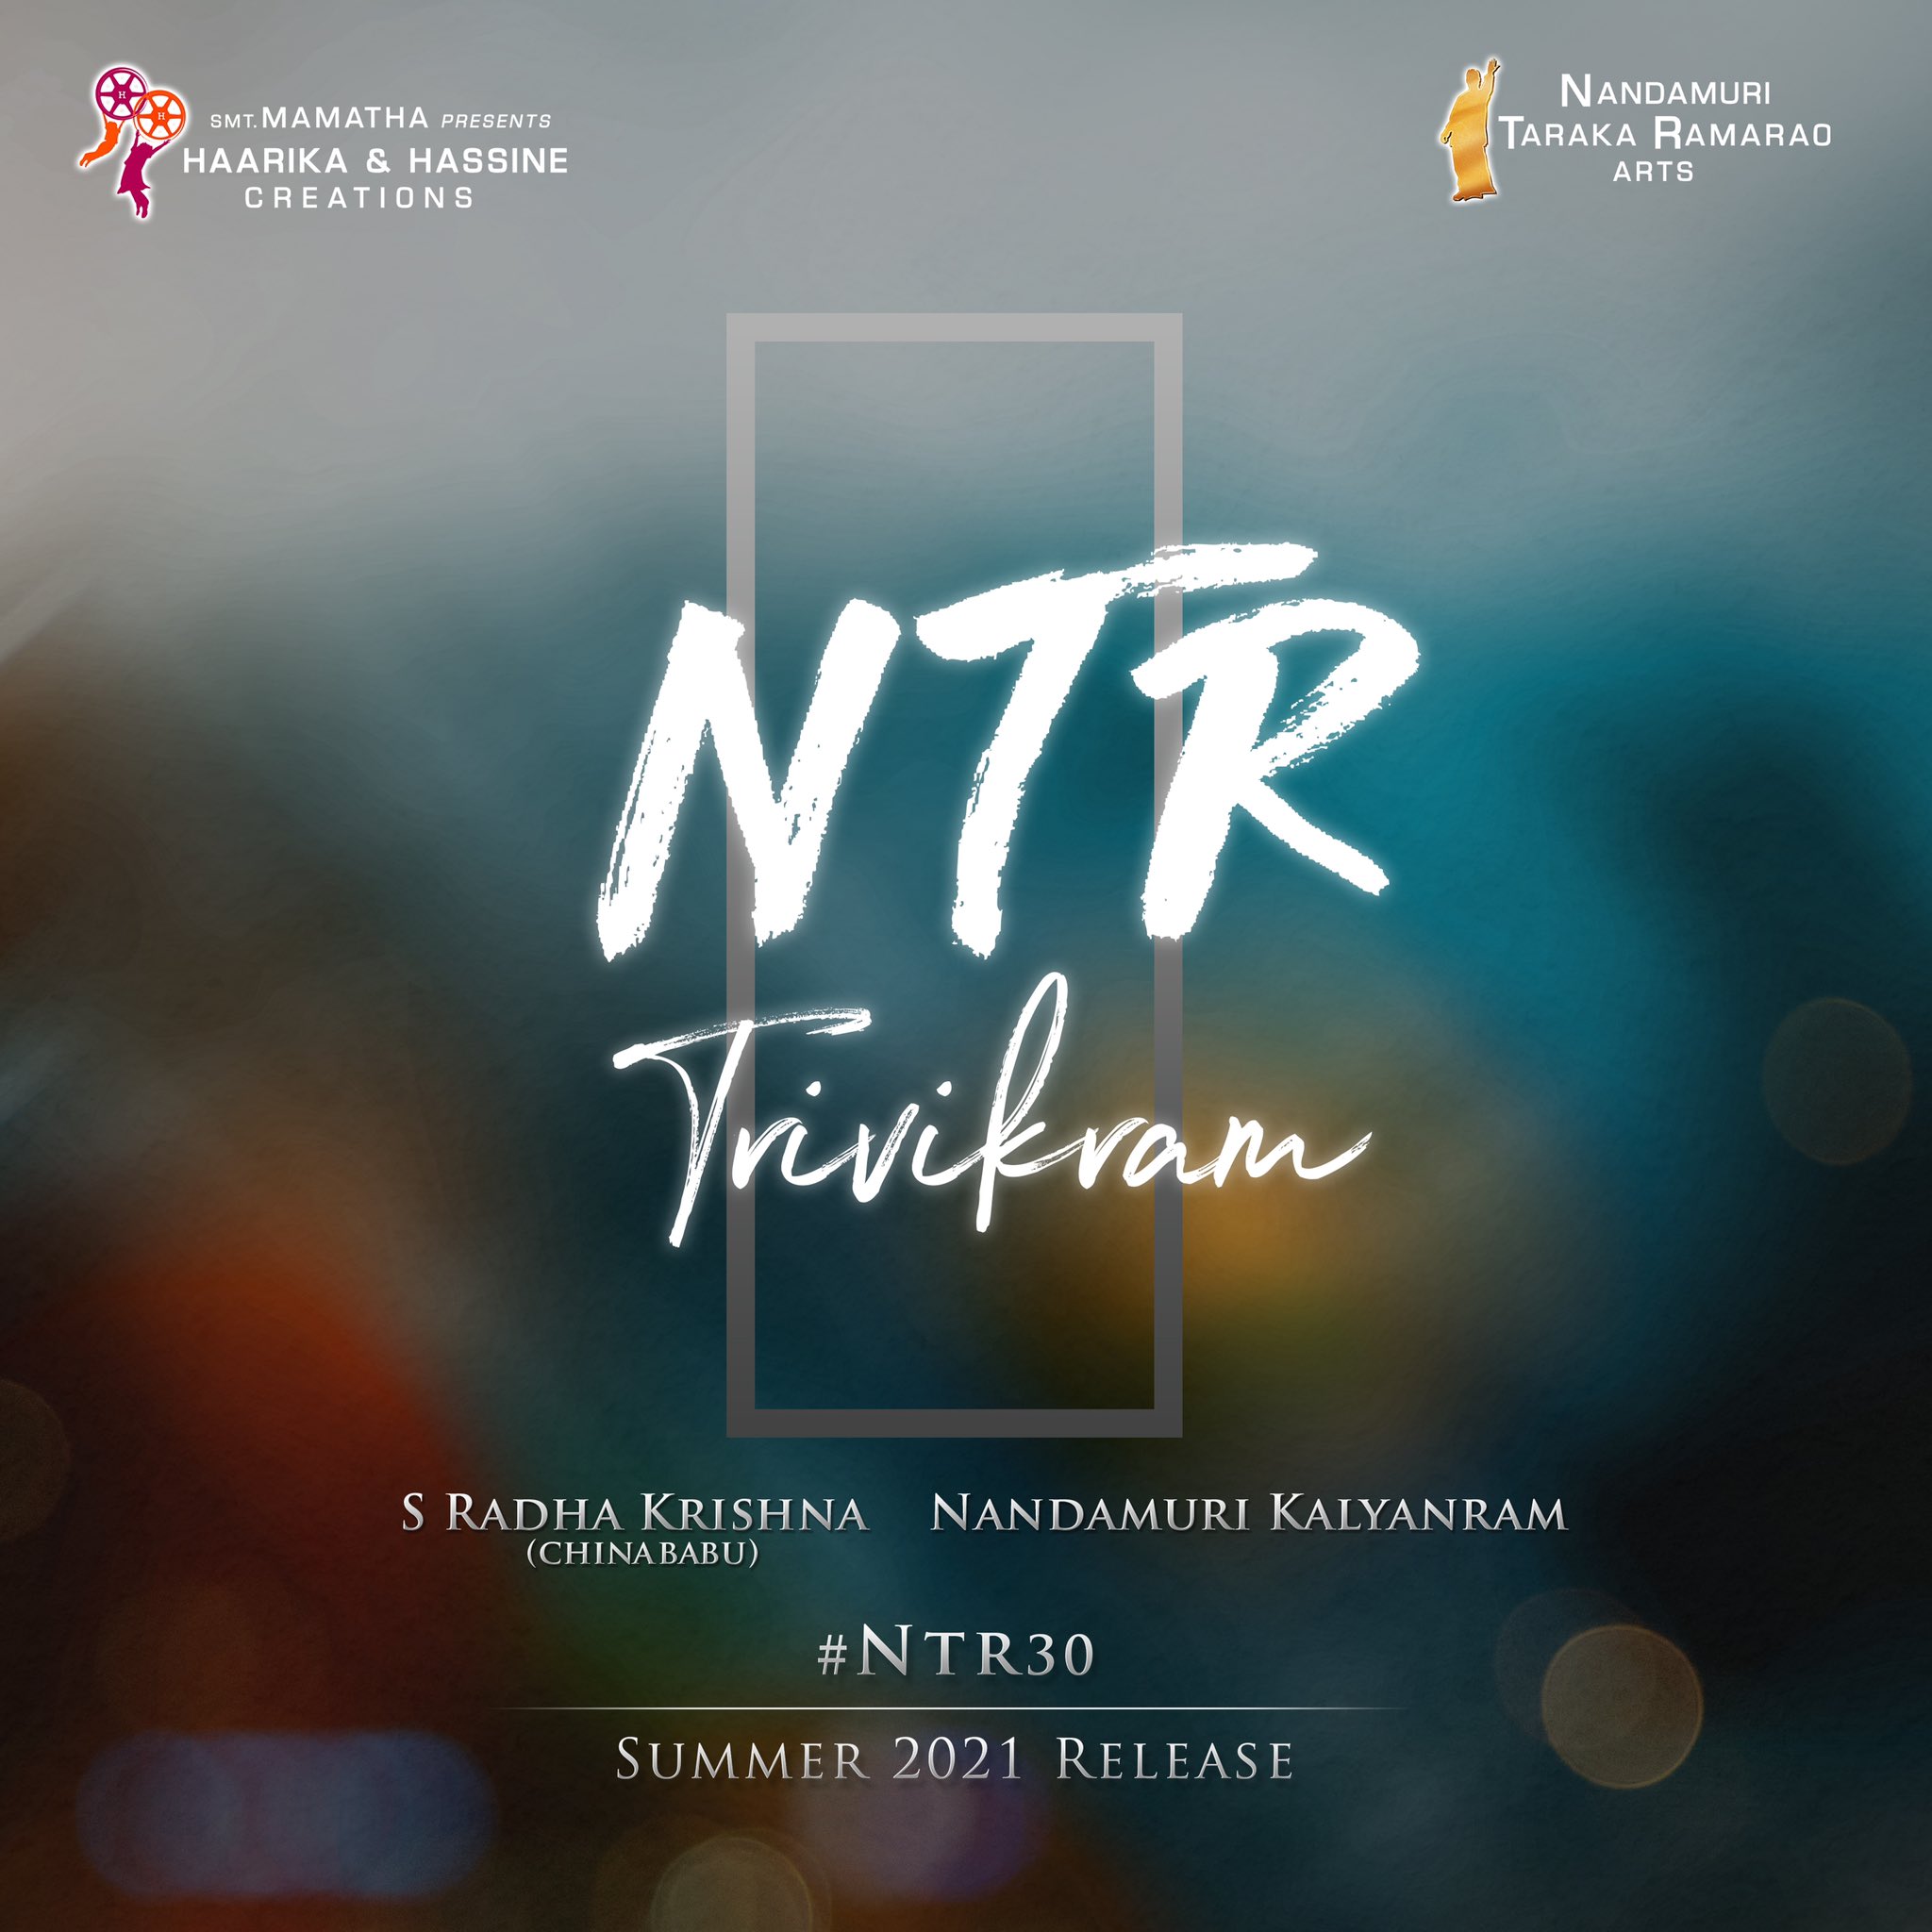 NTR 30 Project with Trivikram Officially Announced